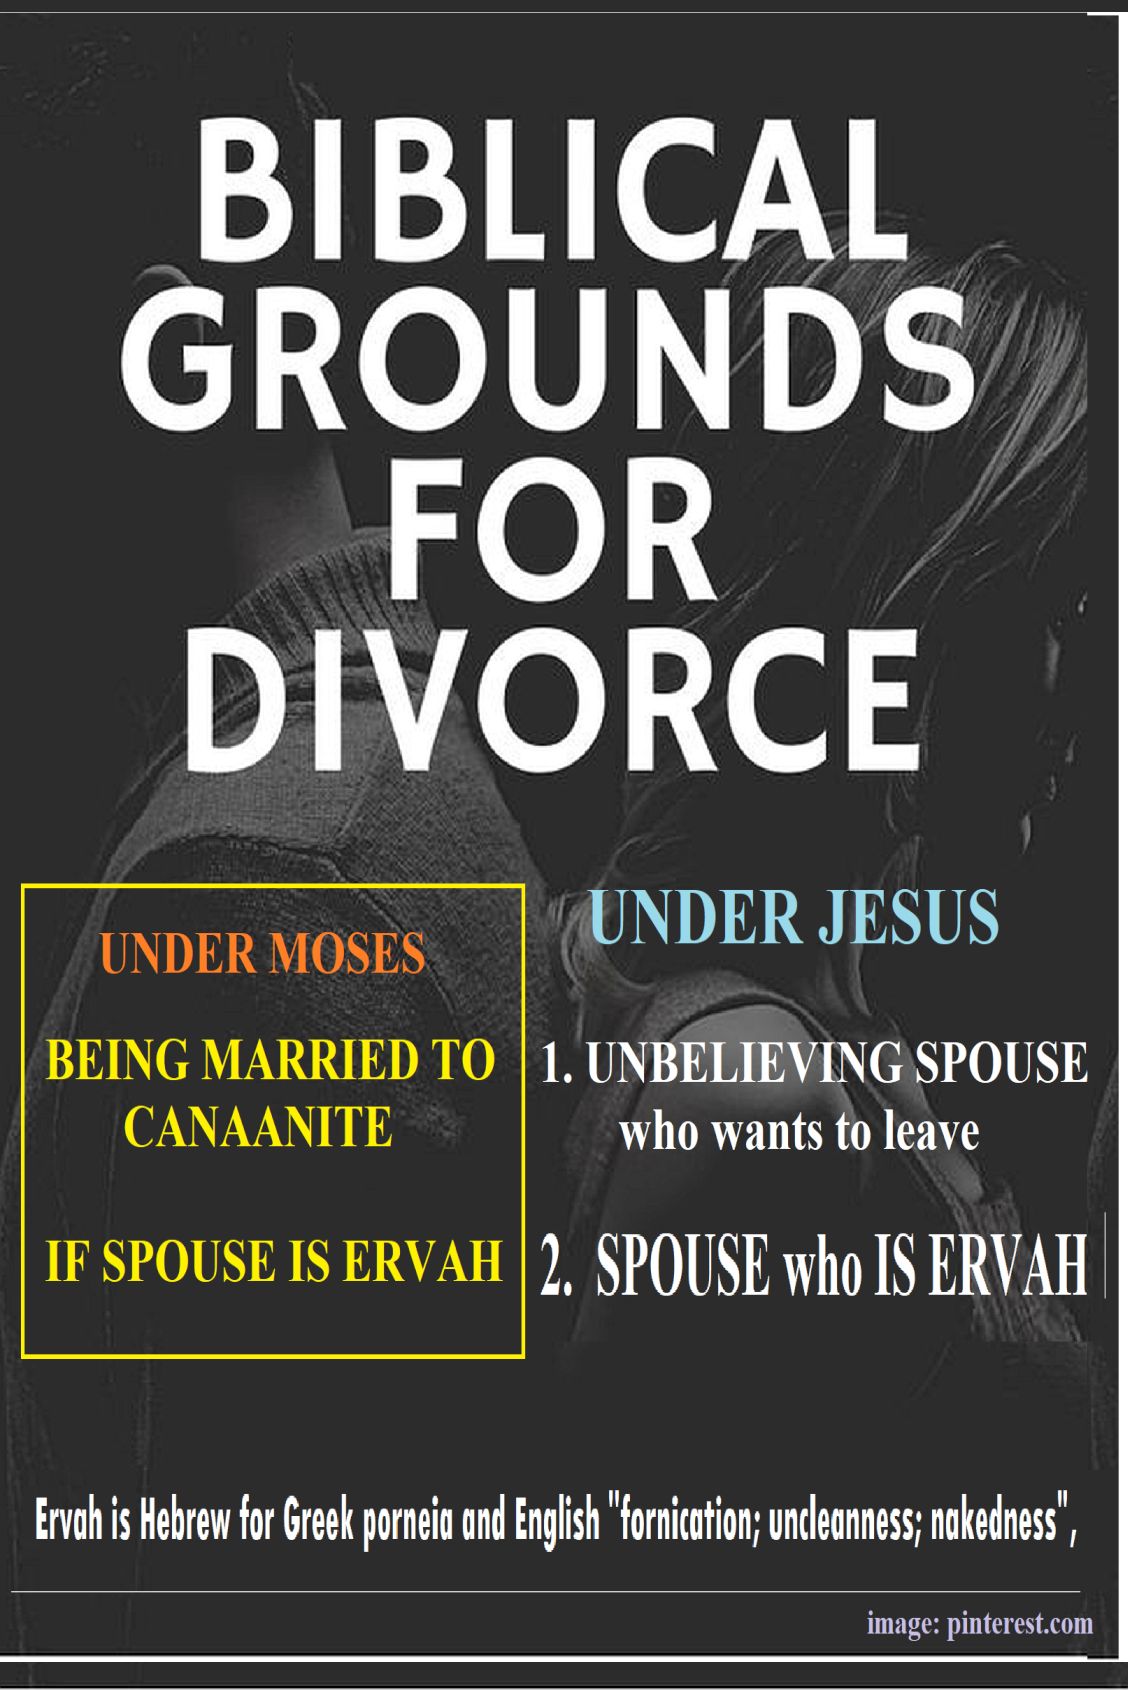 A picture containing text about divorce for fornication (ervah) in the Old and New